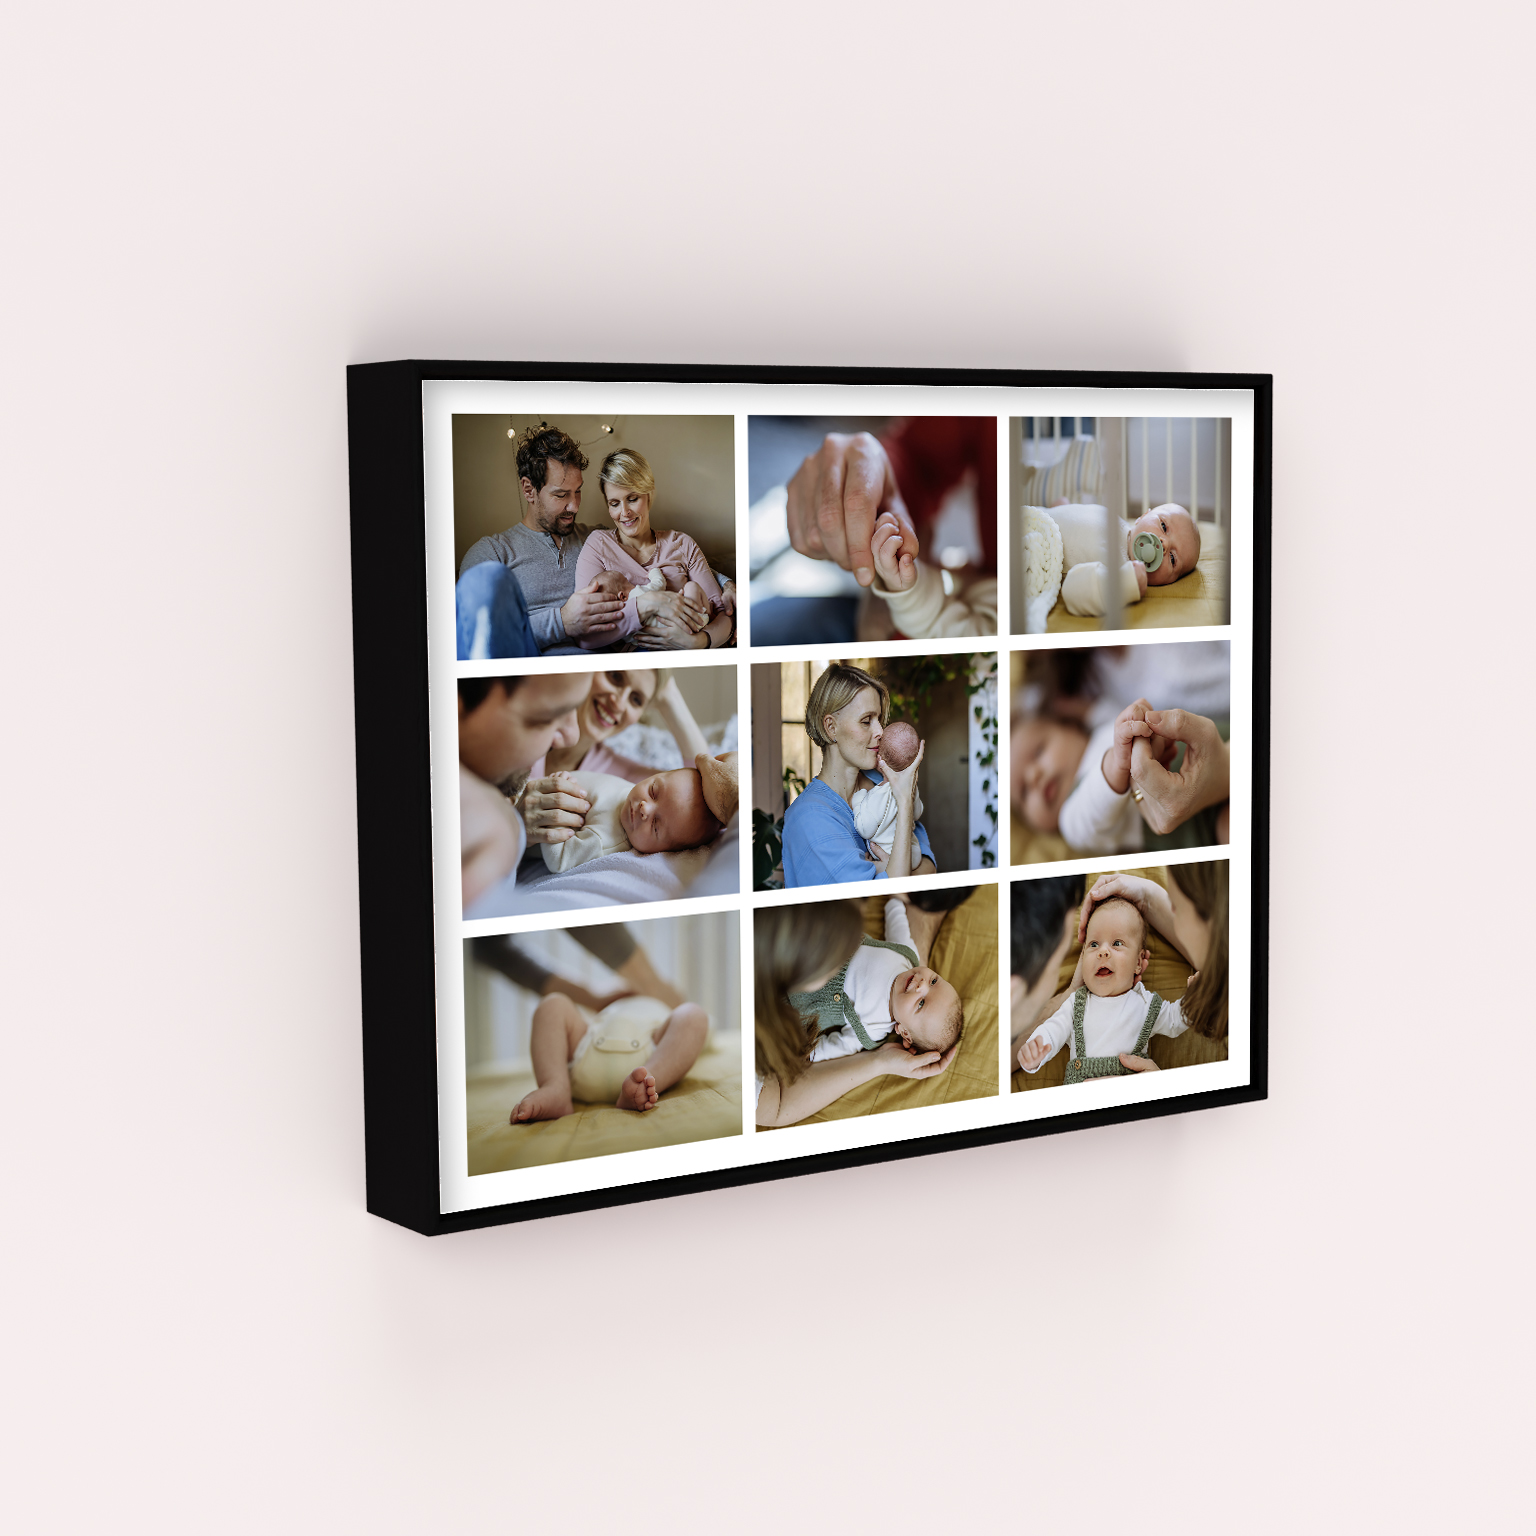 Wall Art Framed Prints featuring 9-fold design - Exhibit cherished memories with this durable and timeless piece